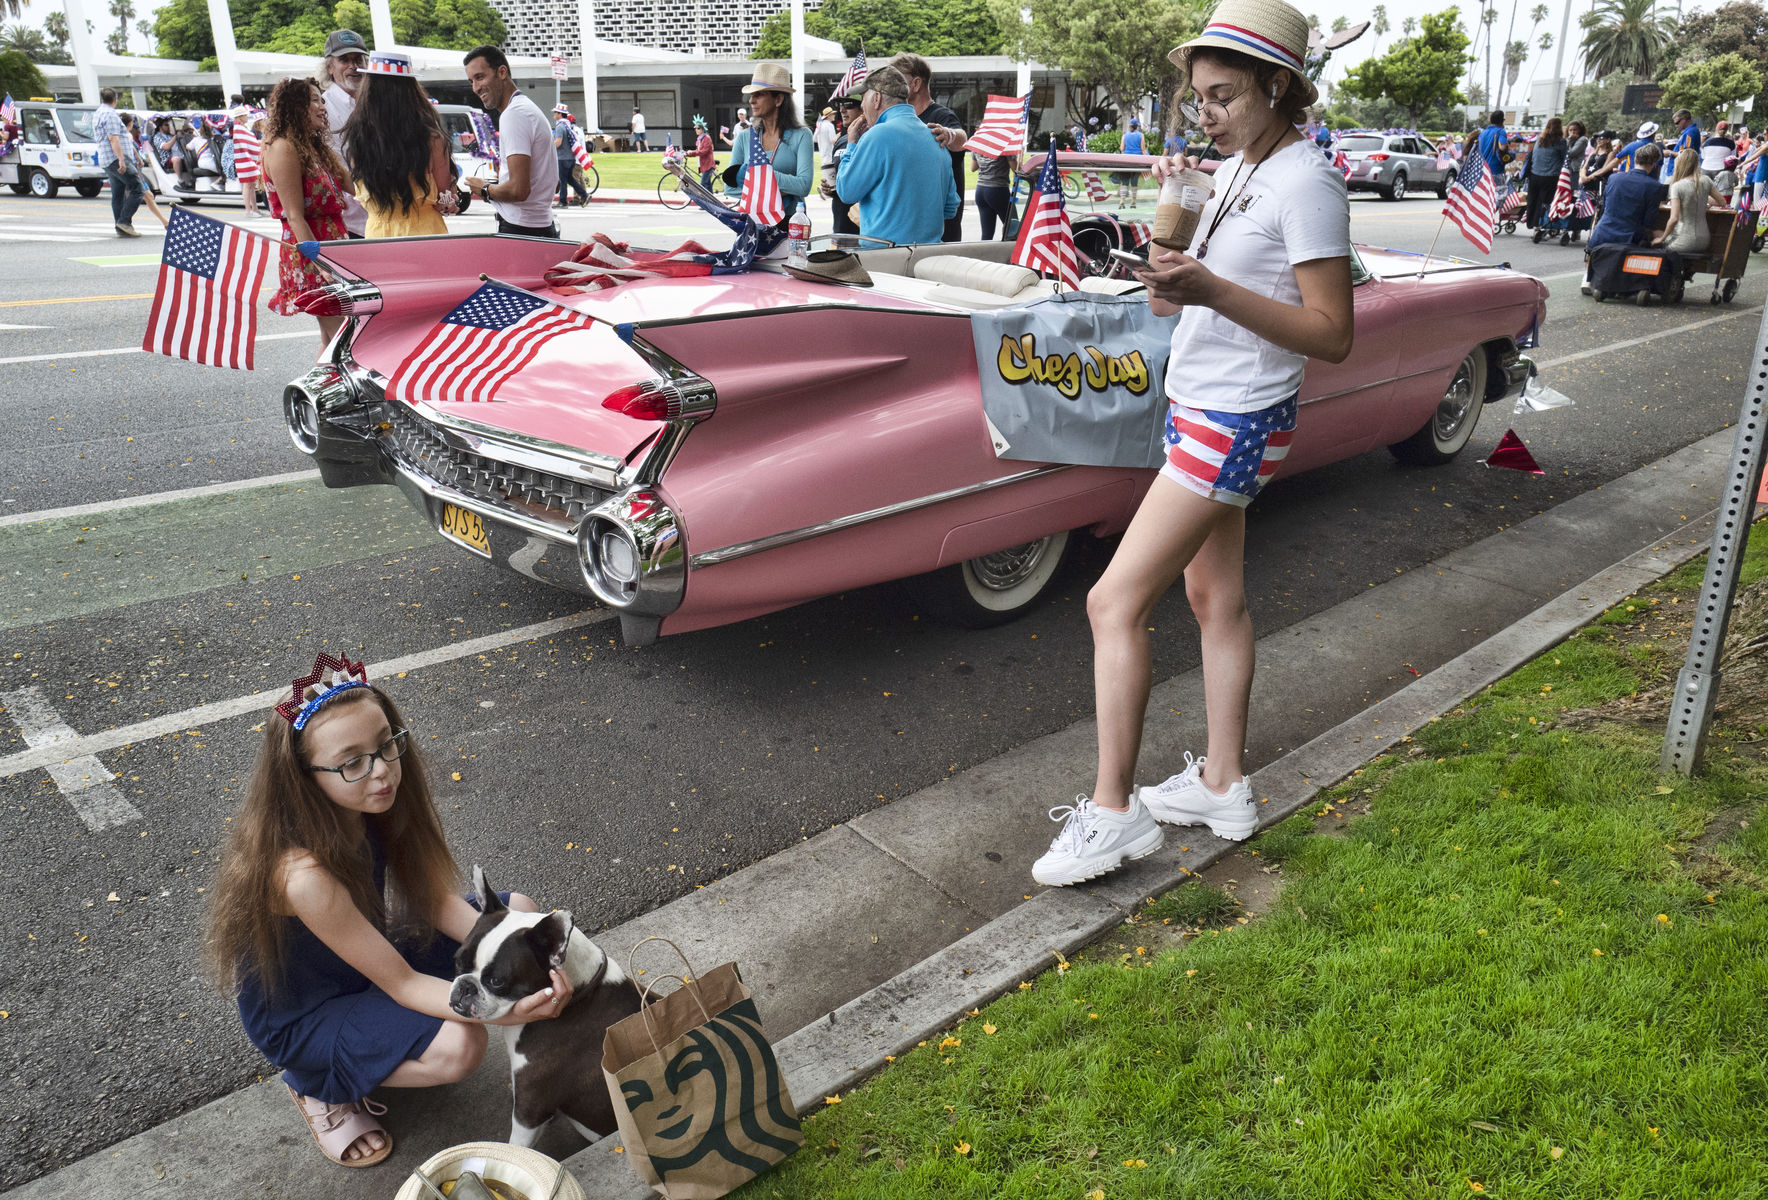 Classic cars and participants wait on the street to take part in the Fourth of July parade in Santa Monica, Calif., on Thursday, July 4, 2019. (AP Photo/Richard Vogel)